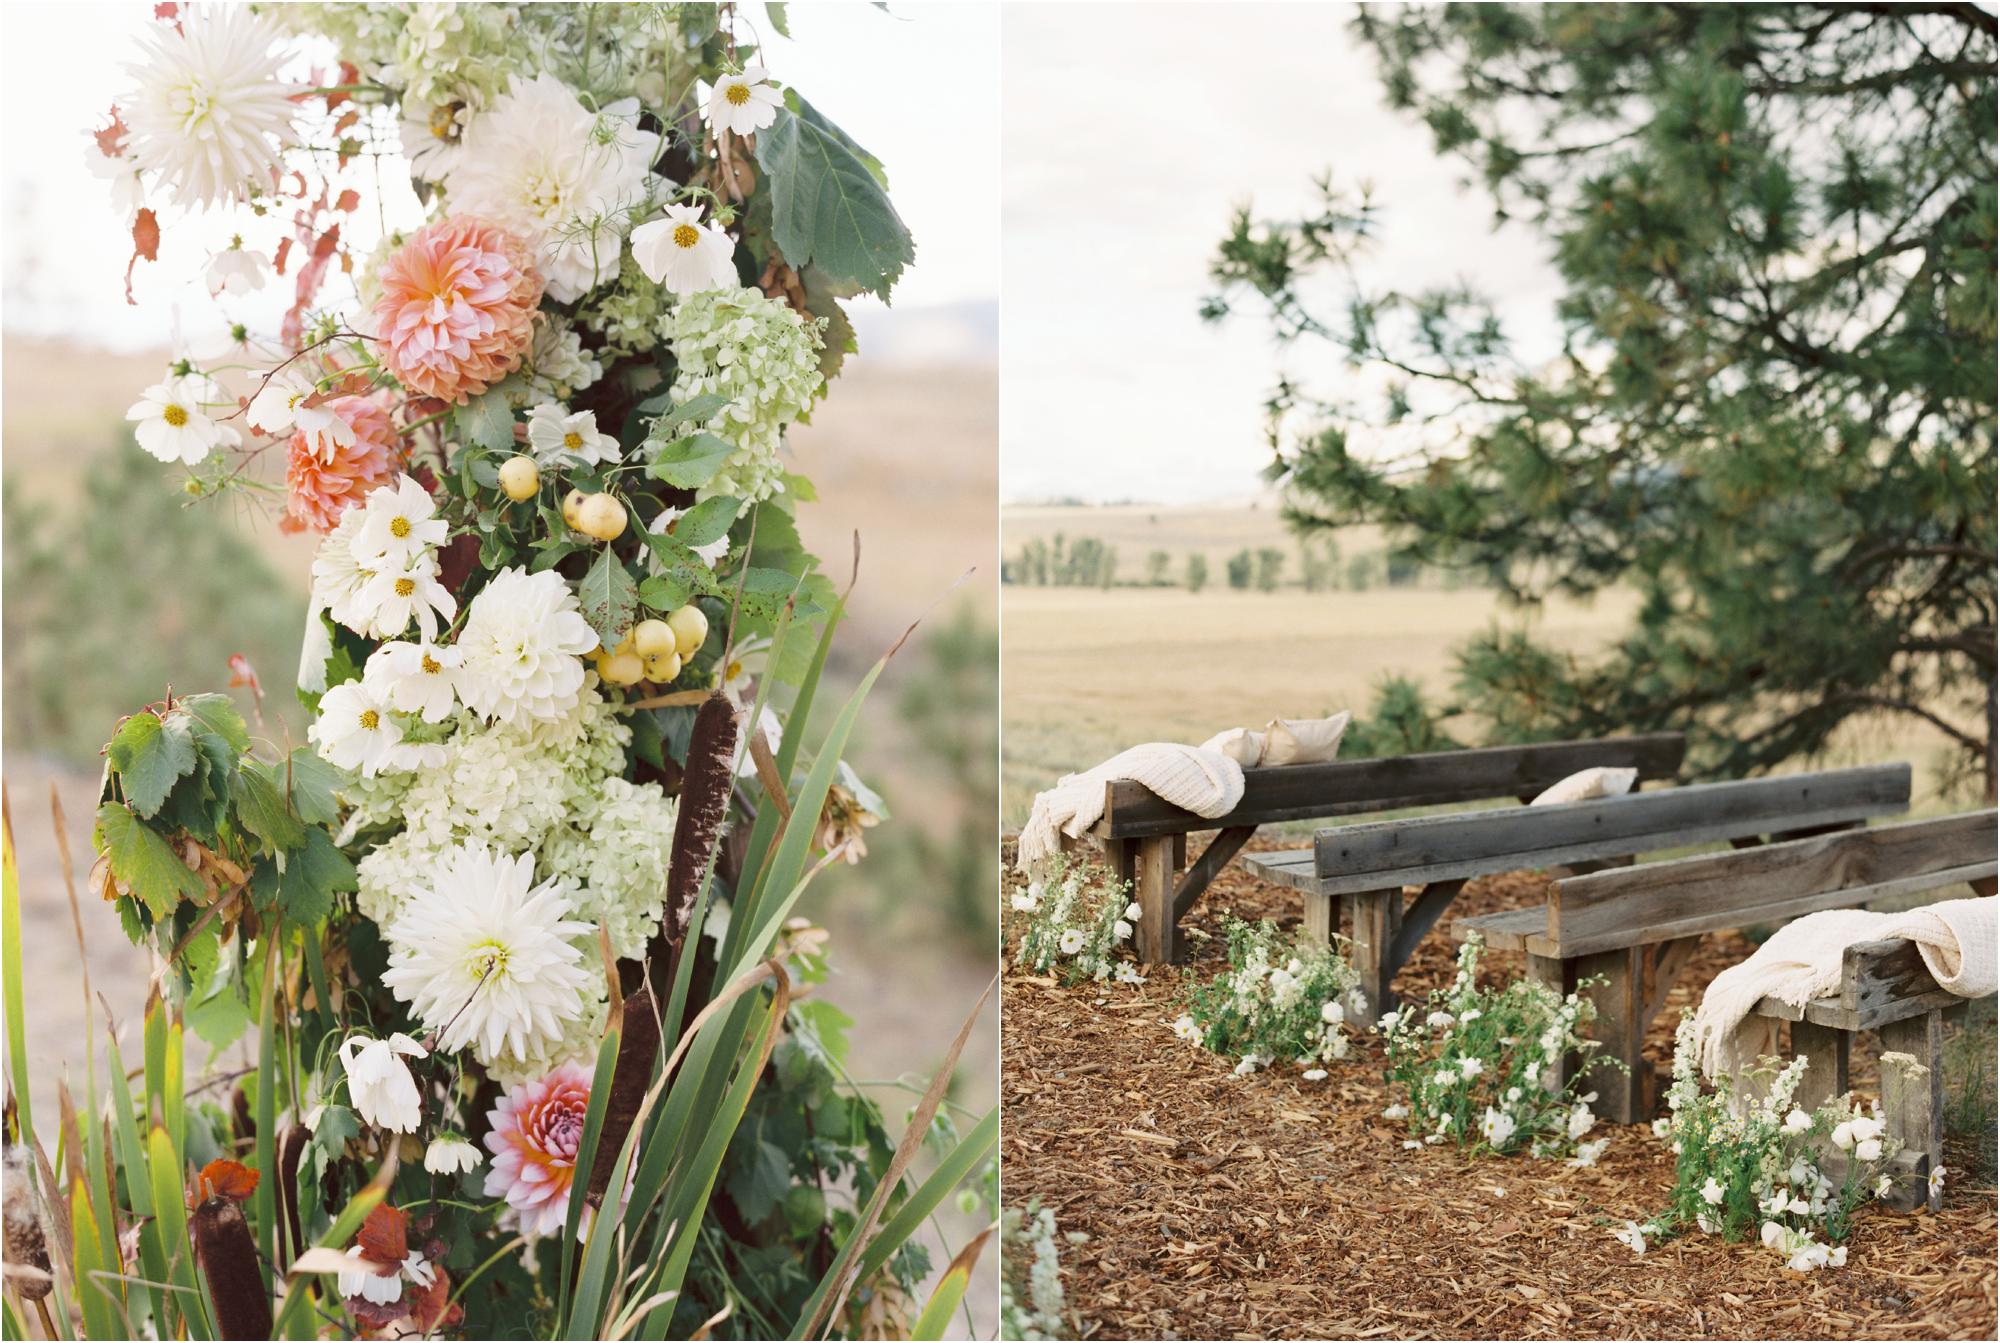 Montana Wedding at the Resort at Paws Up  Design and Florals by Greenwood Events http://www.greenwood.events/   ©Jeremiah & Rachel Photography